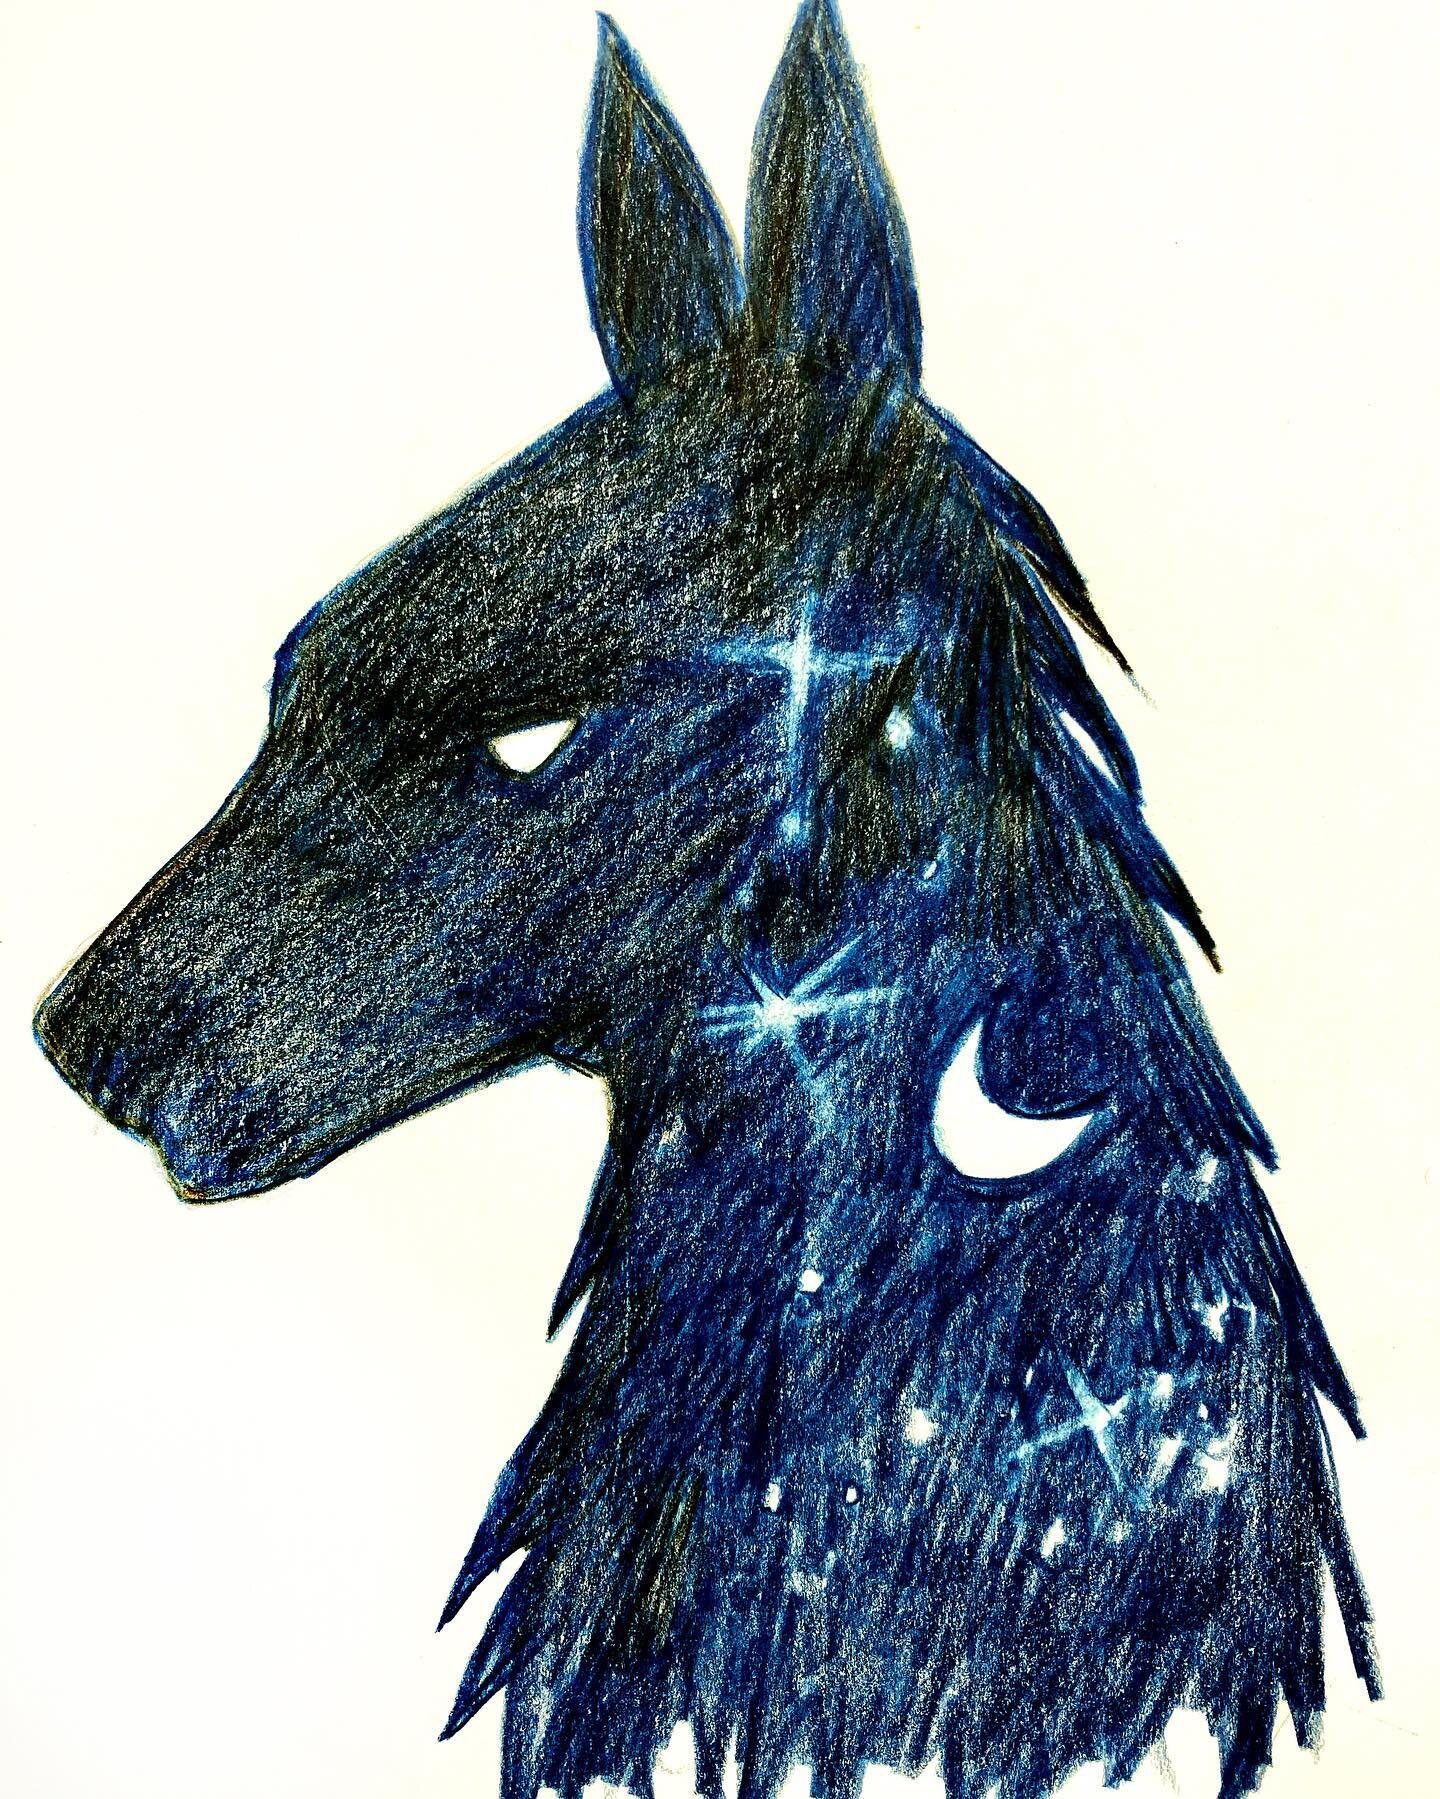 This is the colored pencil artwork wolf-Moon showed to our colored pencil students! Message us if you are interested in taking colored pencil class with us!! 😀😀😀😀
#charlotteartstudio  #parents #art #fineart #creativity #arteducation #elementaryar